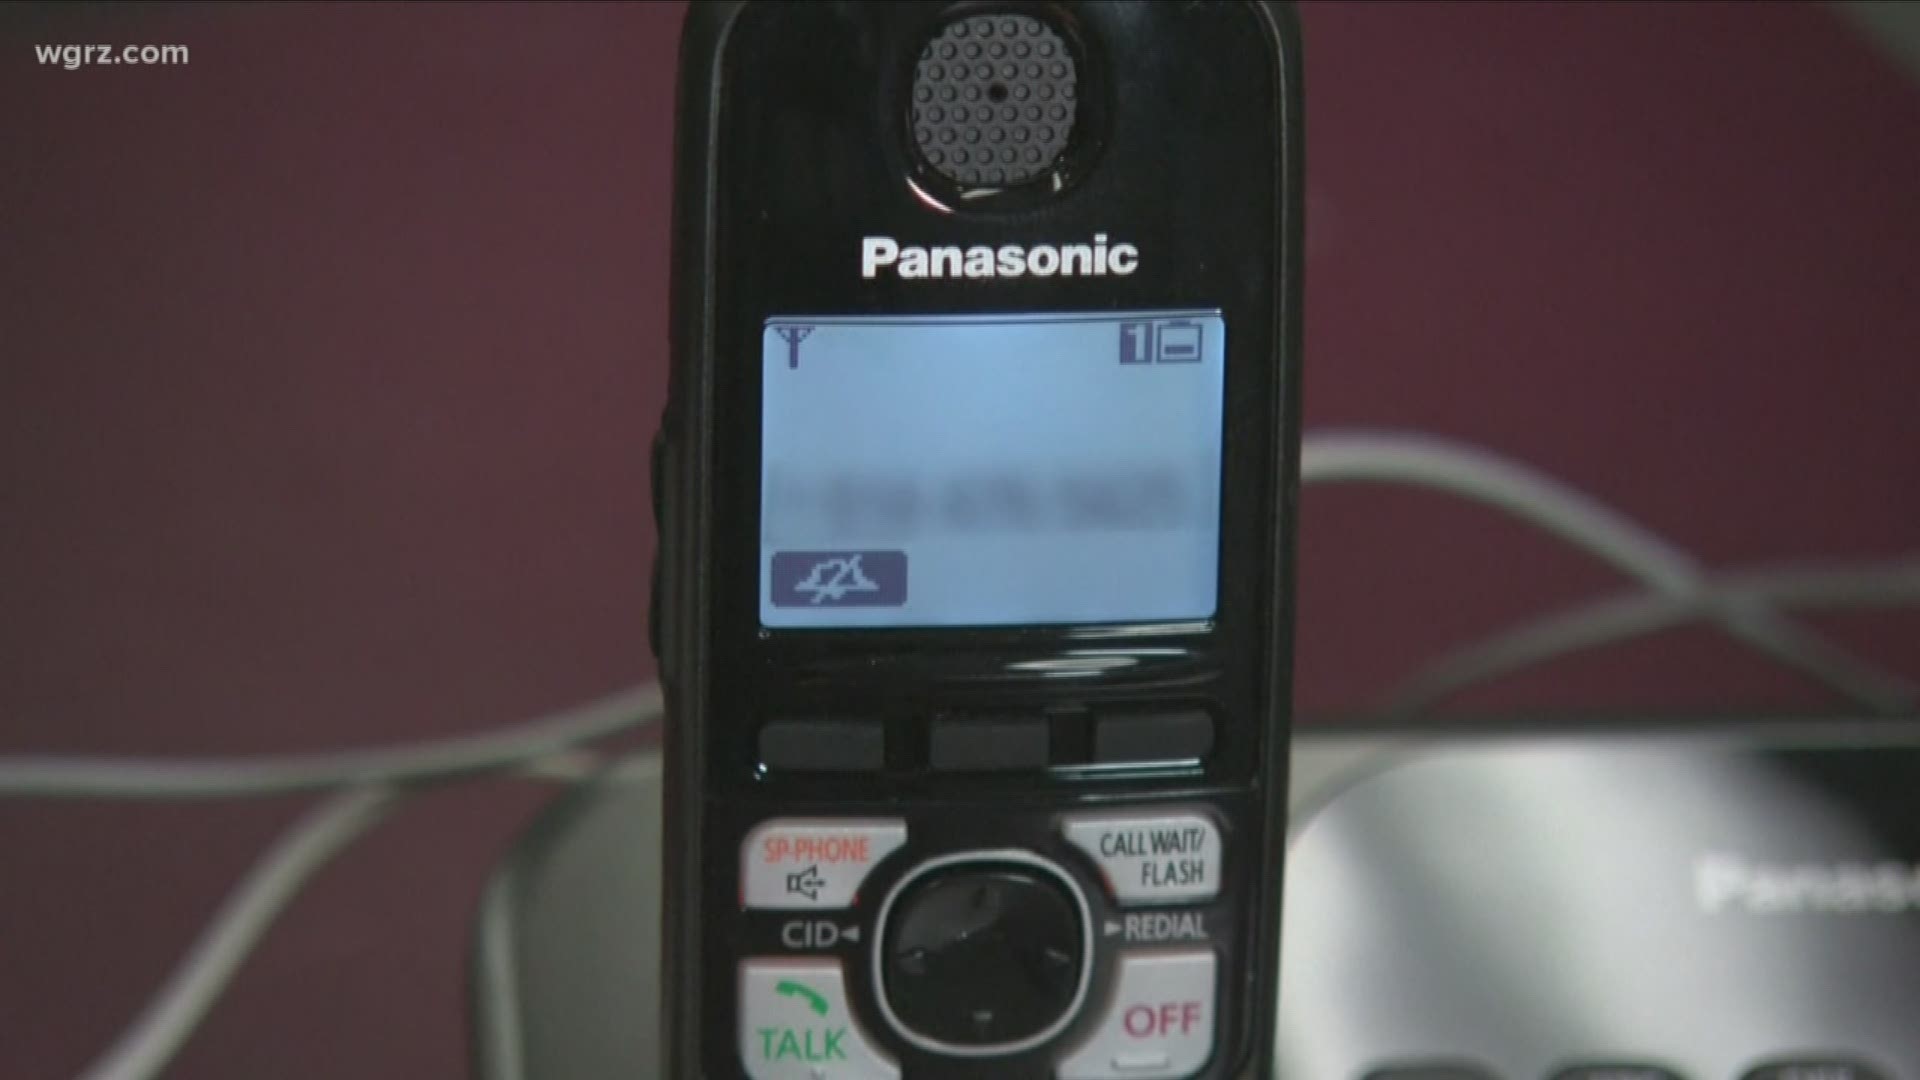 The Senate and Assembly both passed bills that are aimed at making sure phone lines stay open during emergencies.